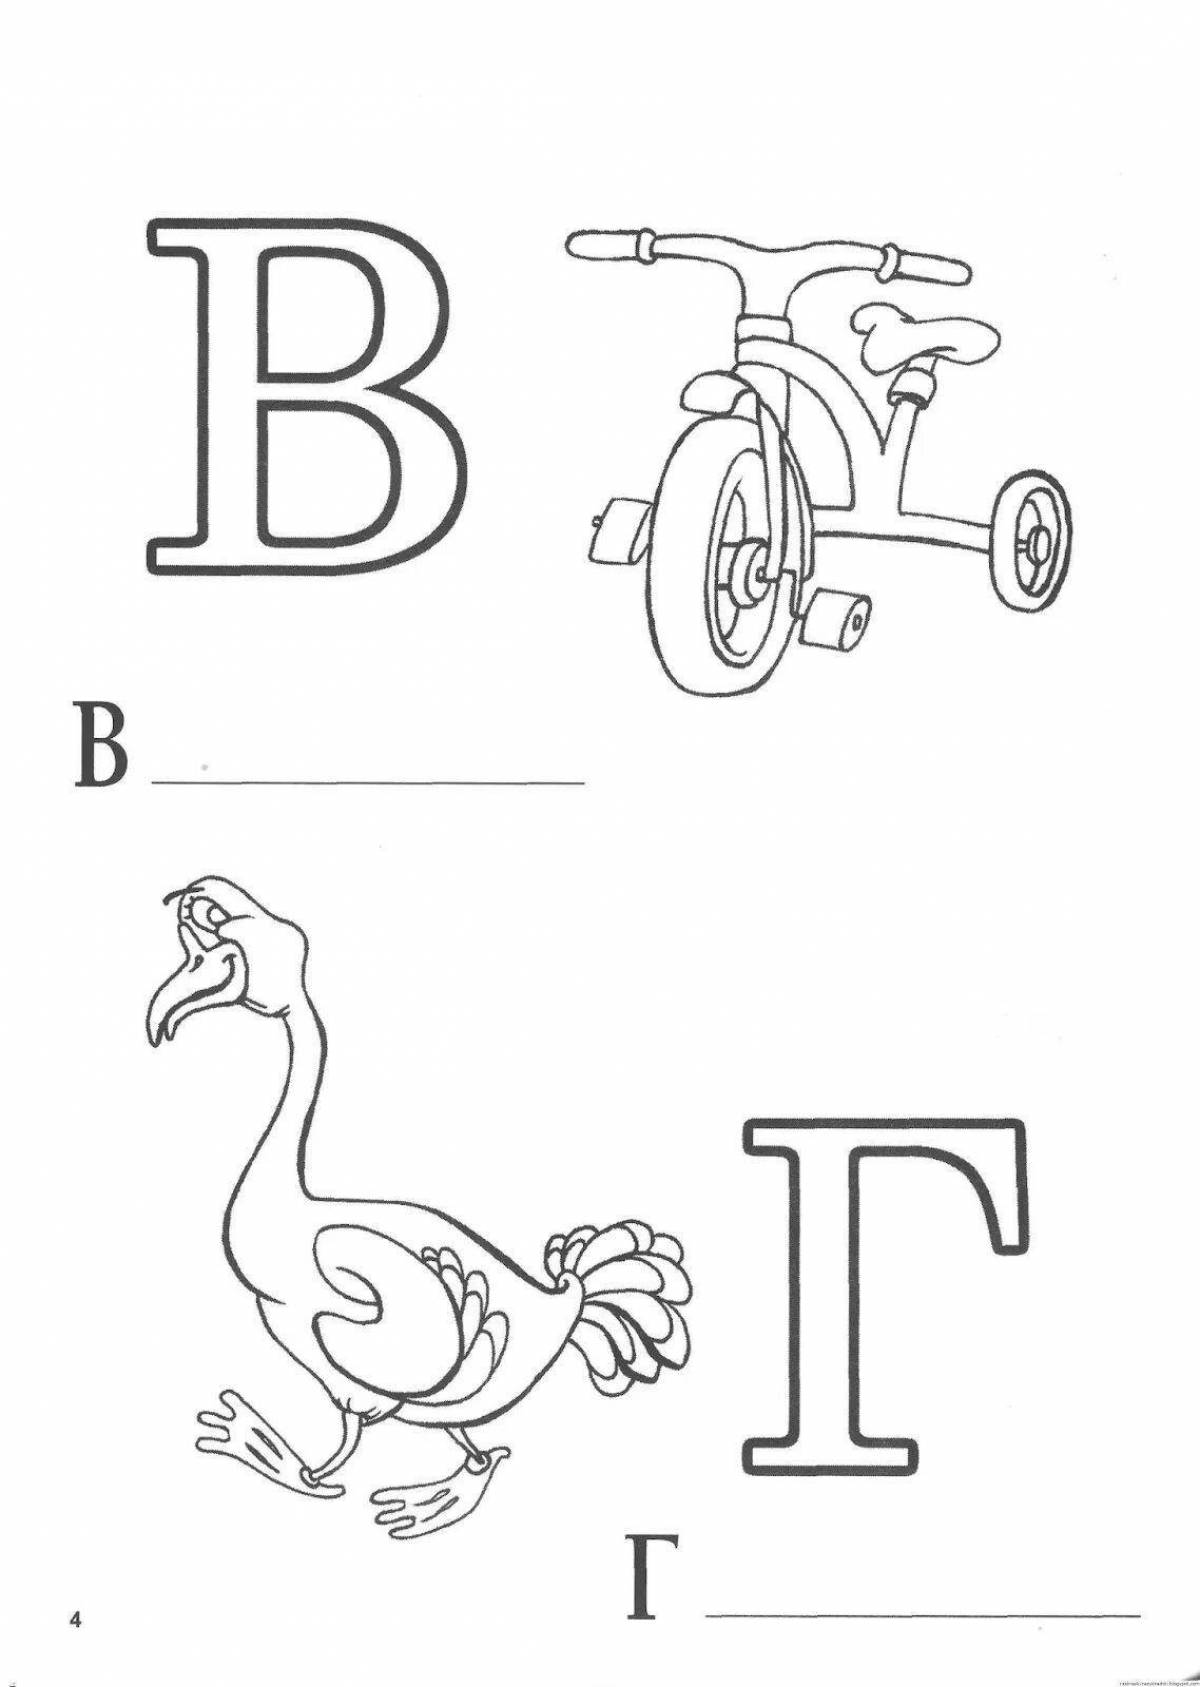 Fun coloring book with letters